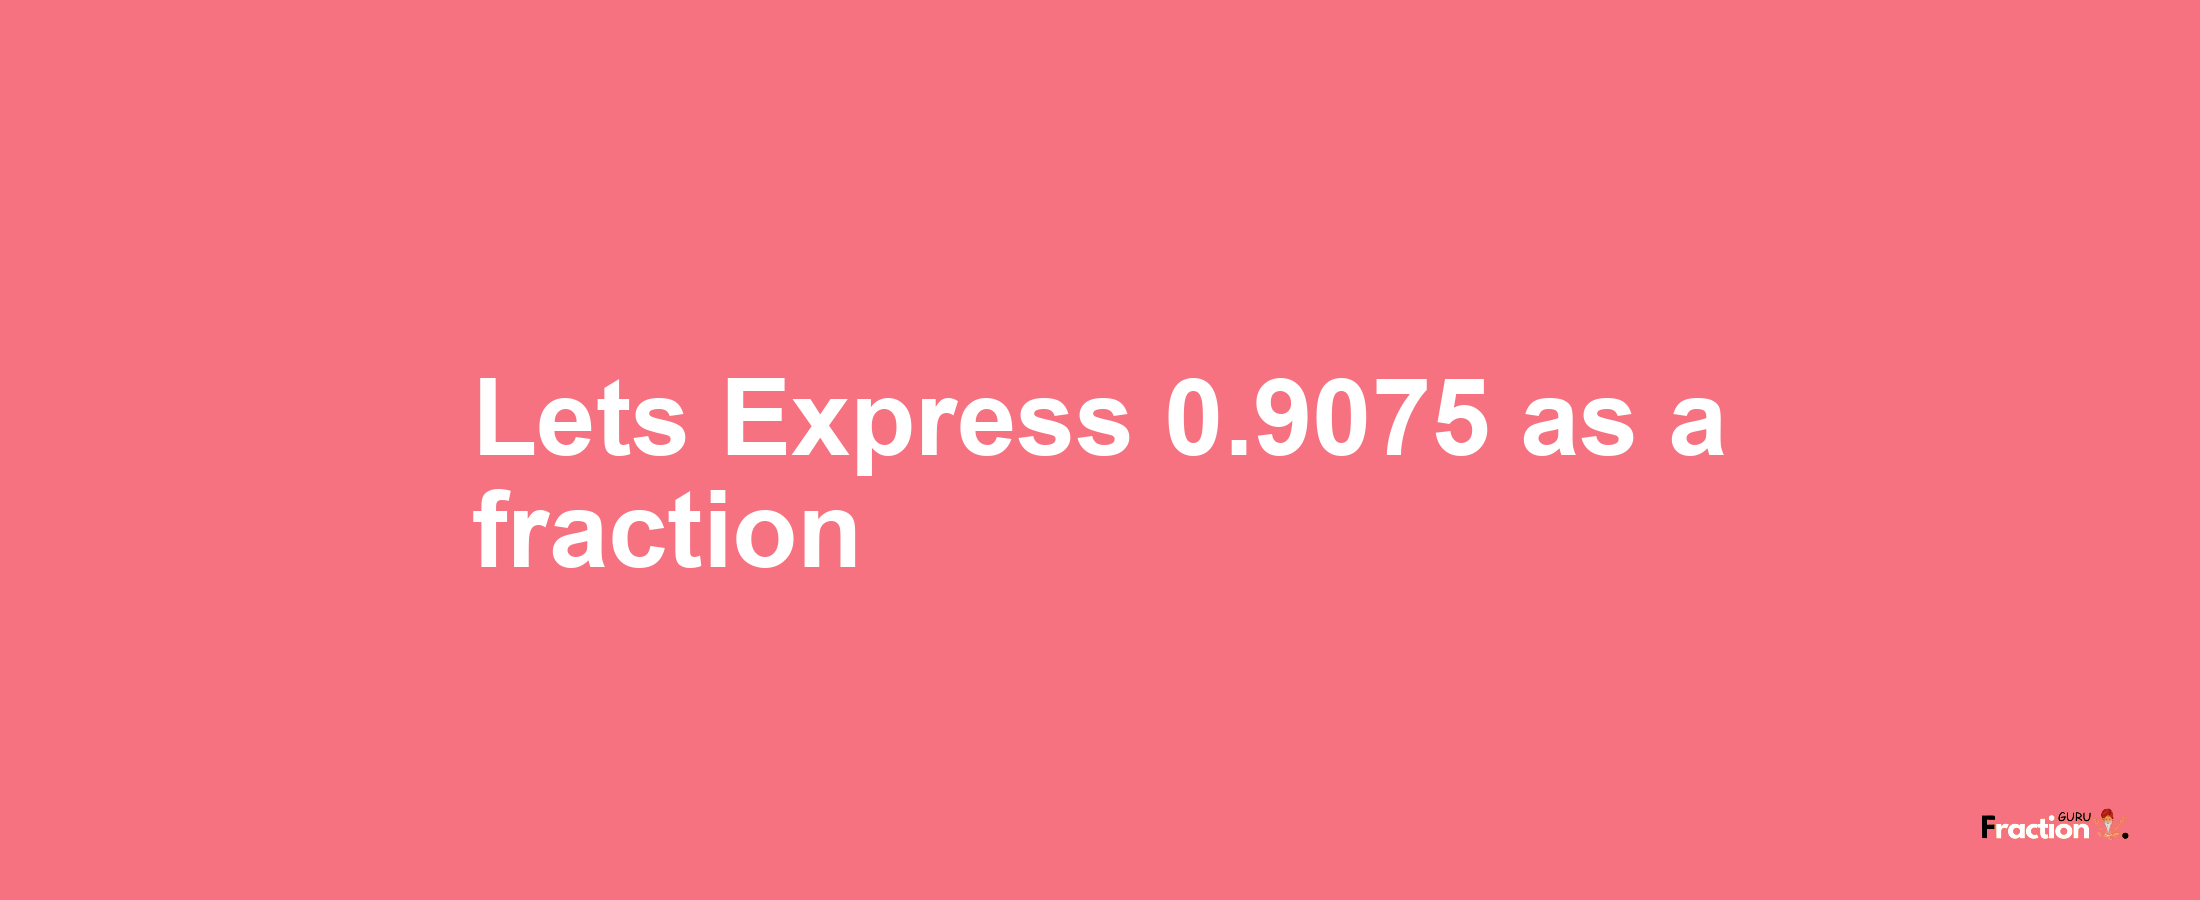 Lets Express 0.9075 as afraction